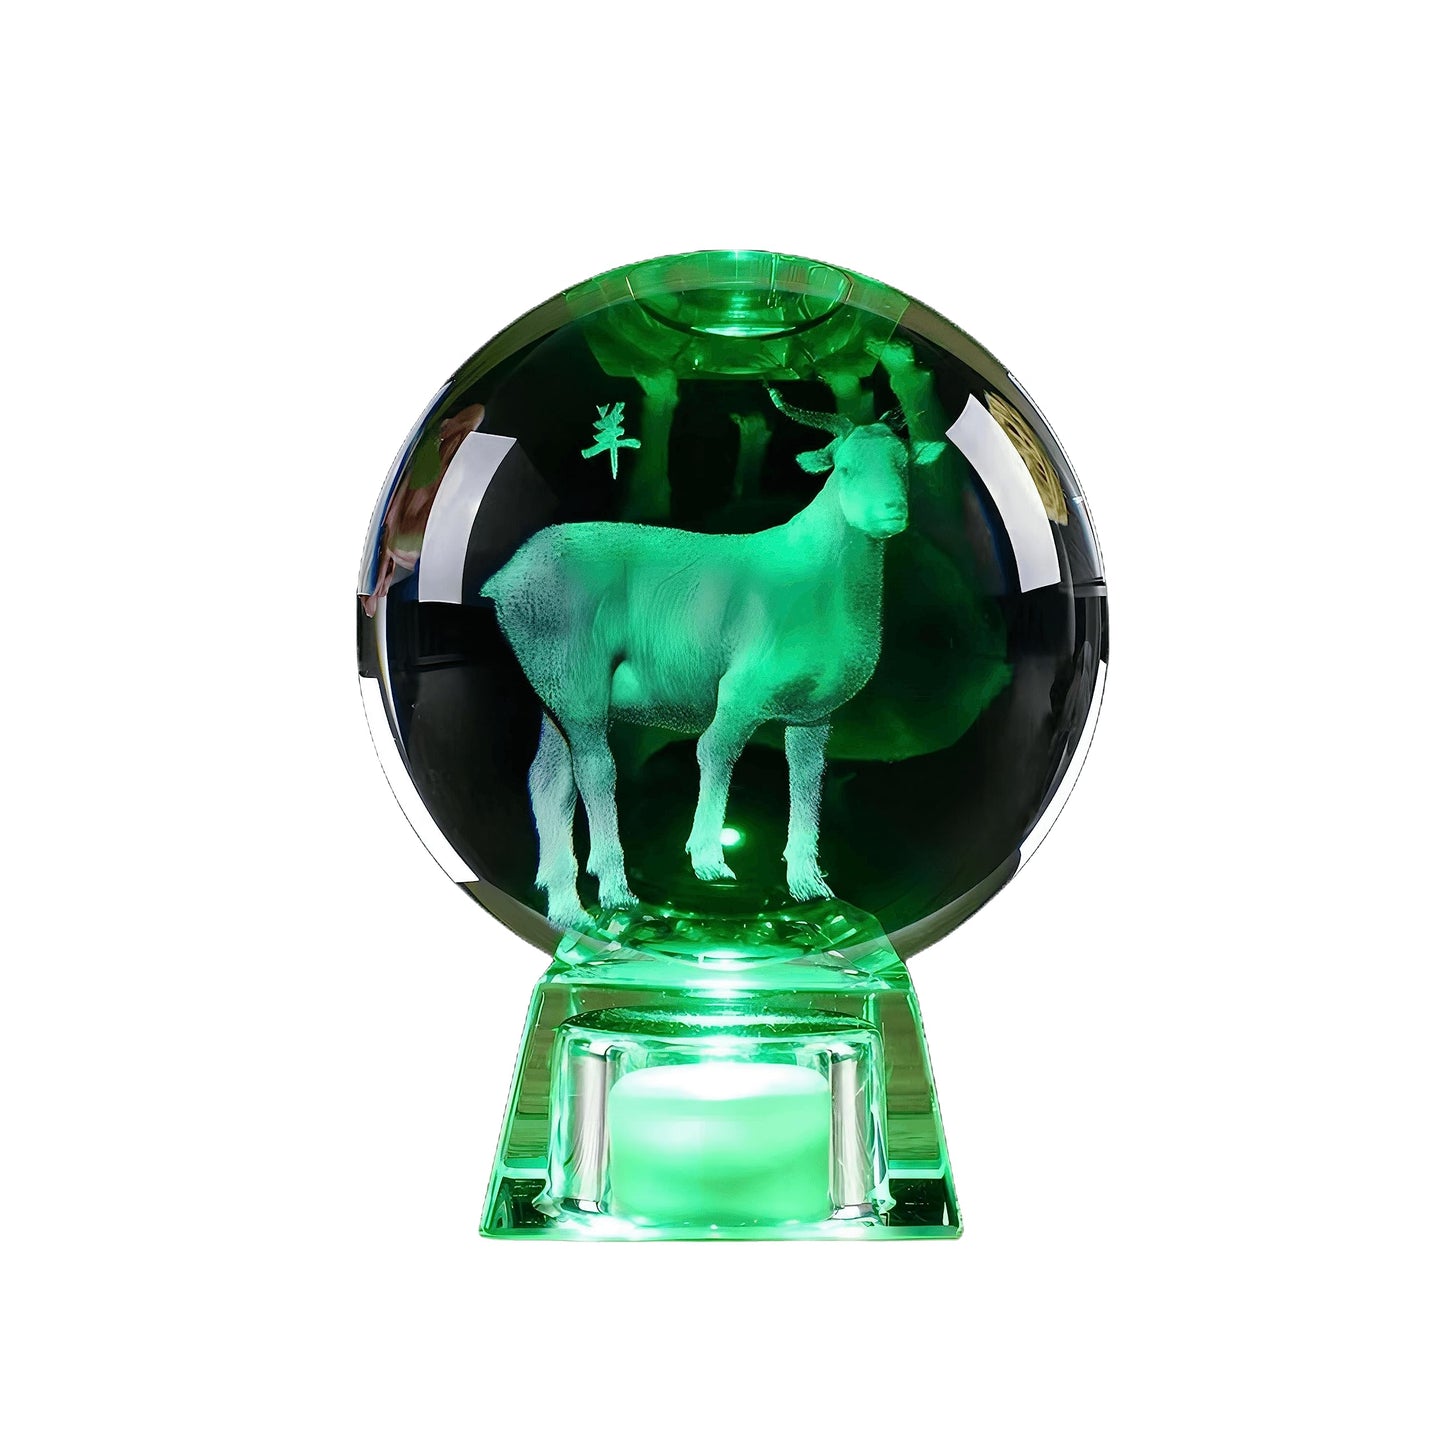 INSNIC Chinese Zodiac 3D Crystal Ball